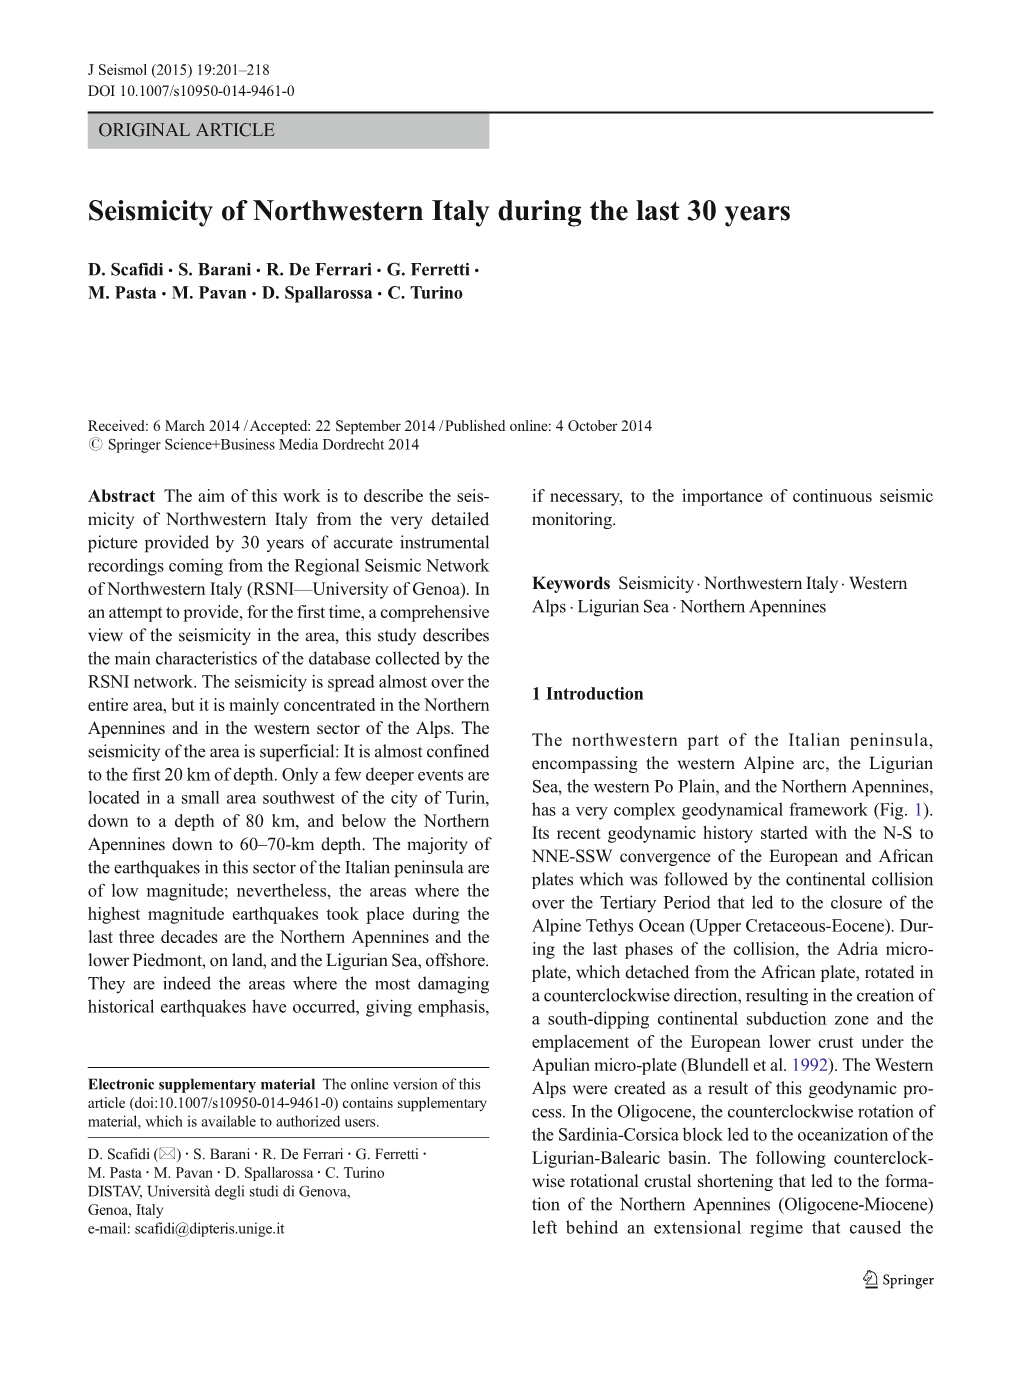 Seismicity of Northwestern Italy During the Last 30 Years